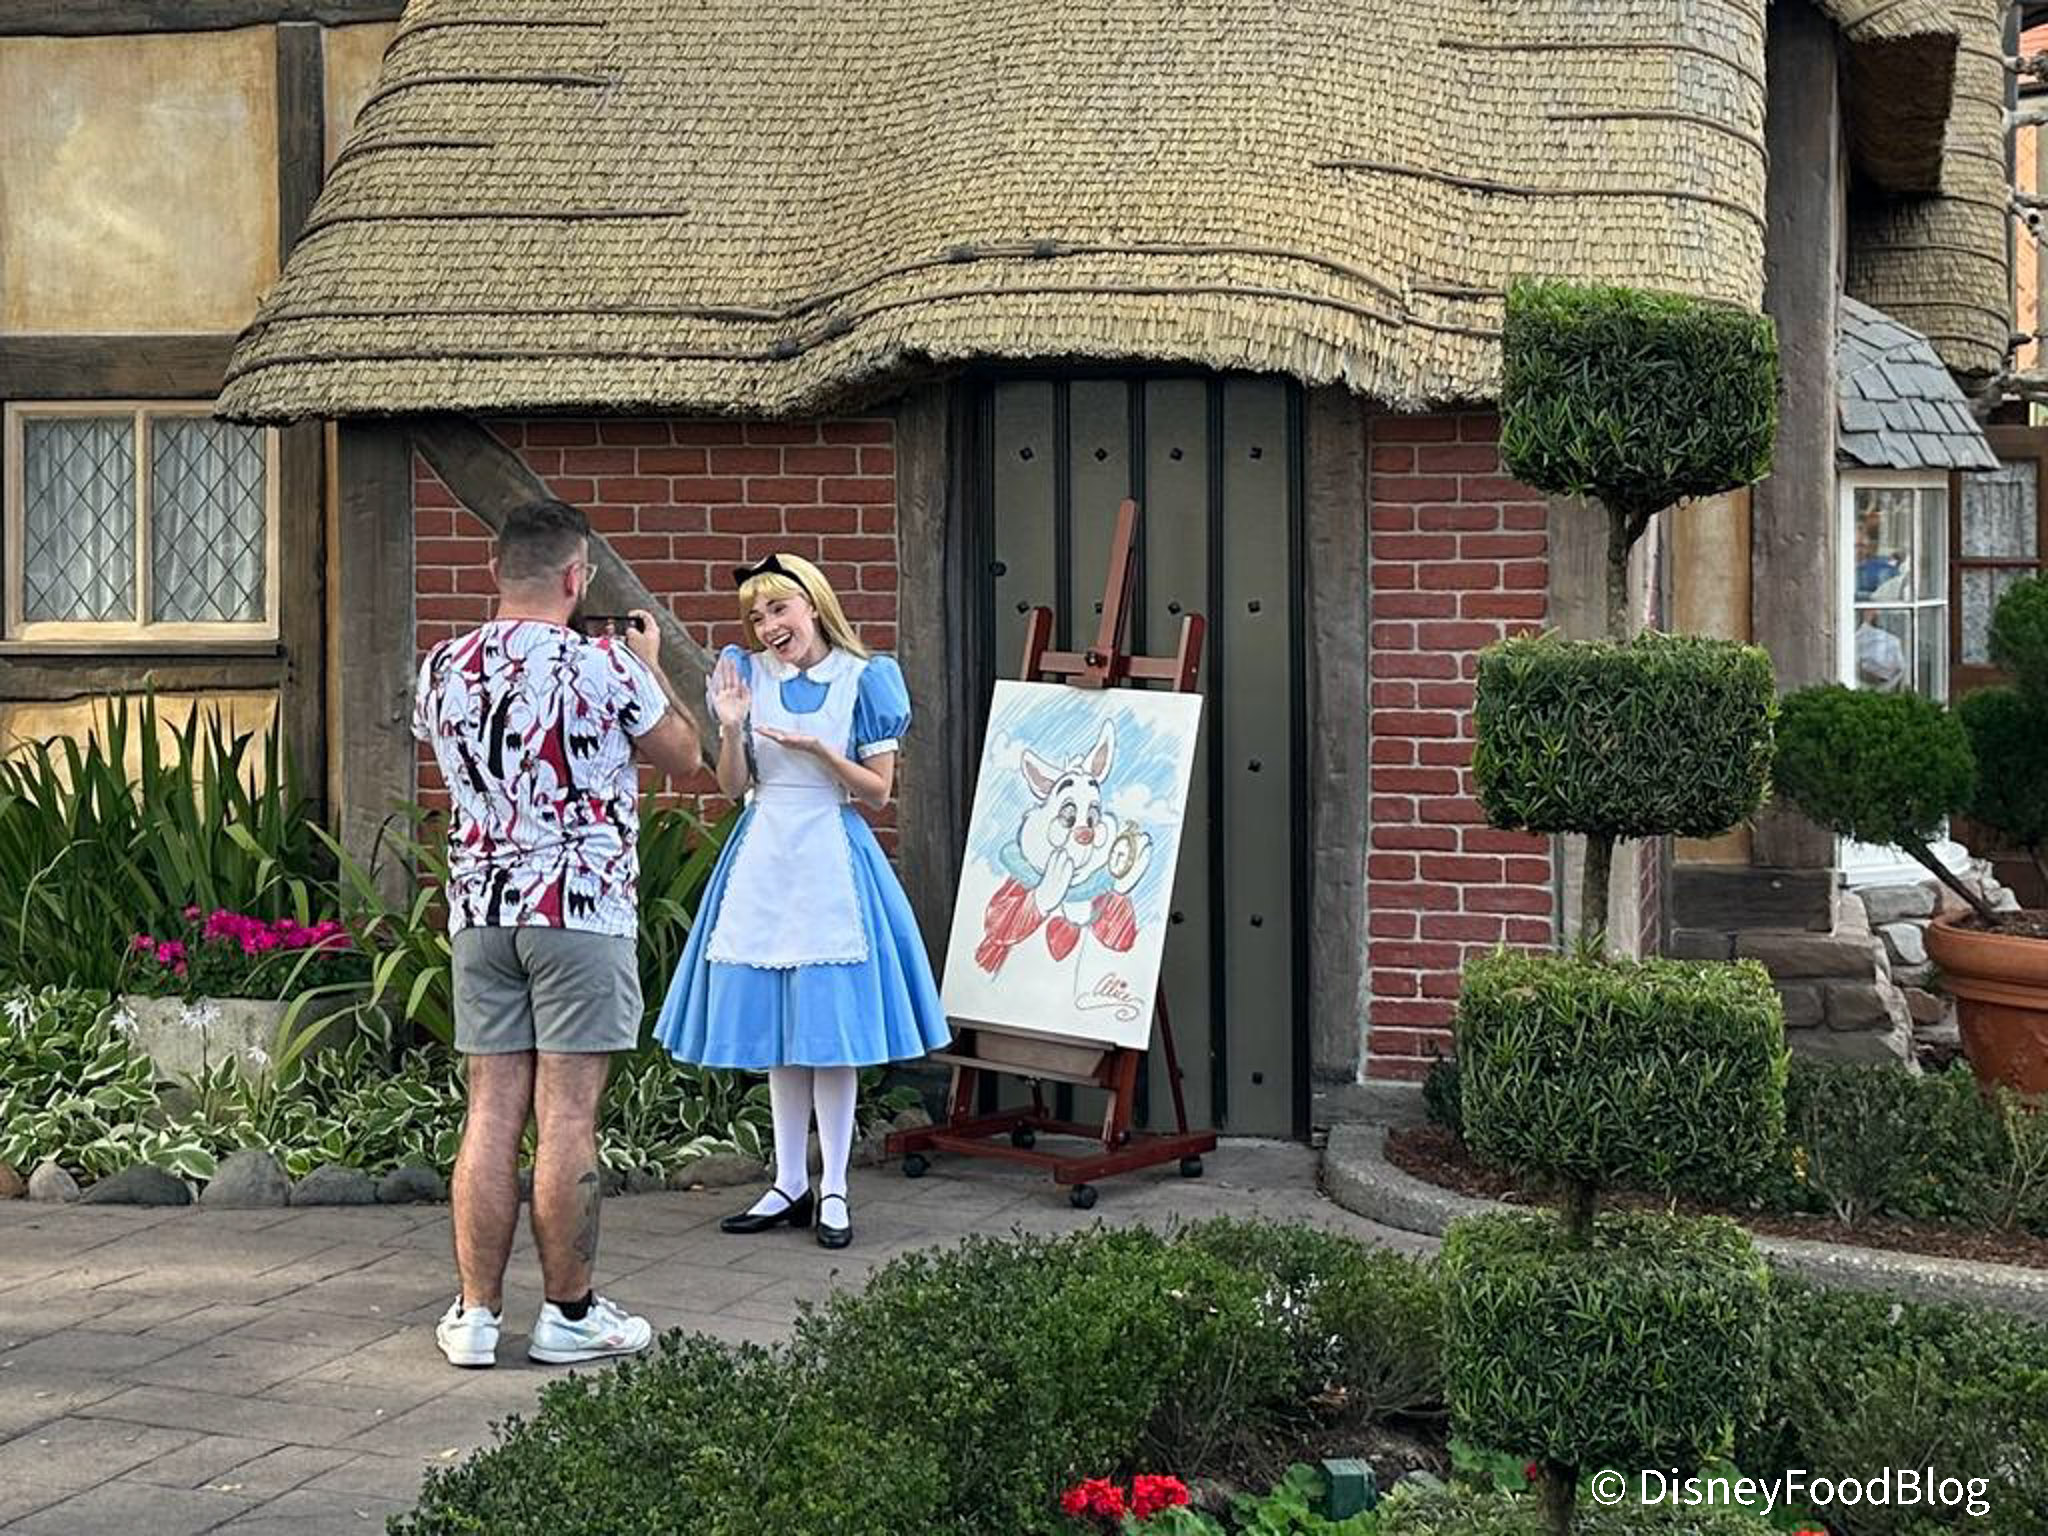 https://www.disneyfoodblog.com/wp-content/uploads/2023/01/wdw-epcot-festival-of-the-arts-alice-character-art-.jpg